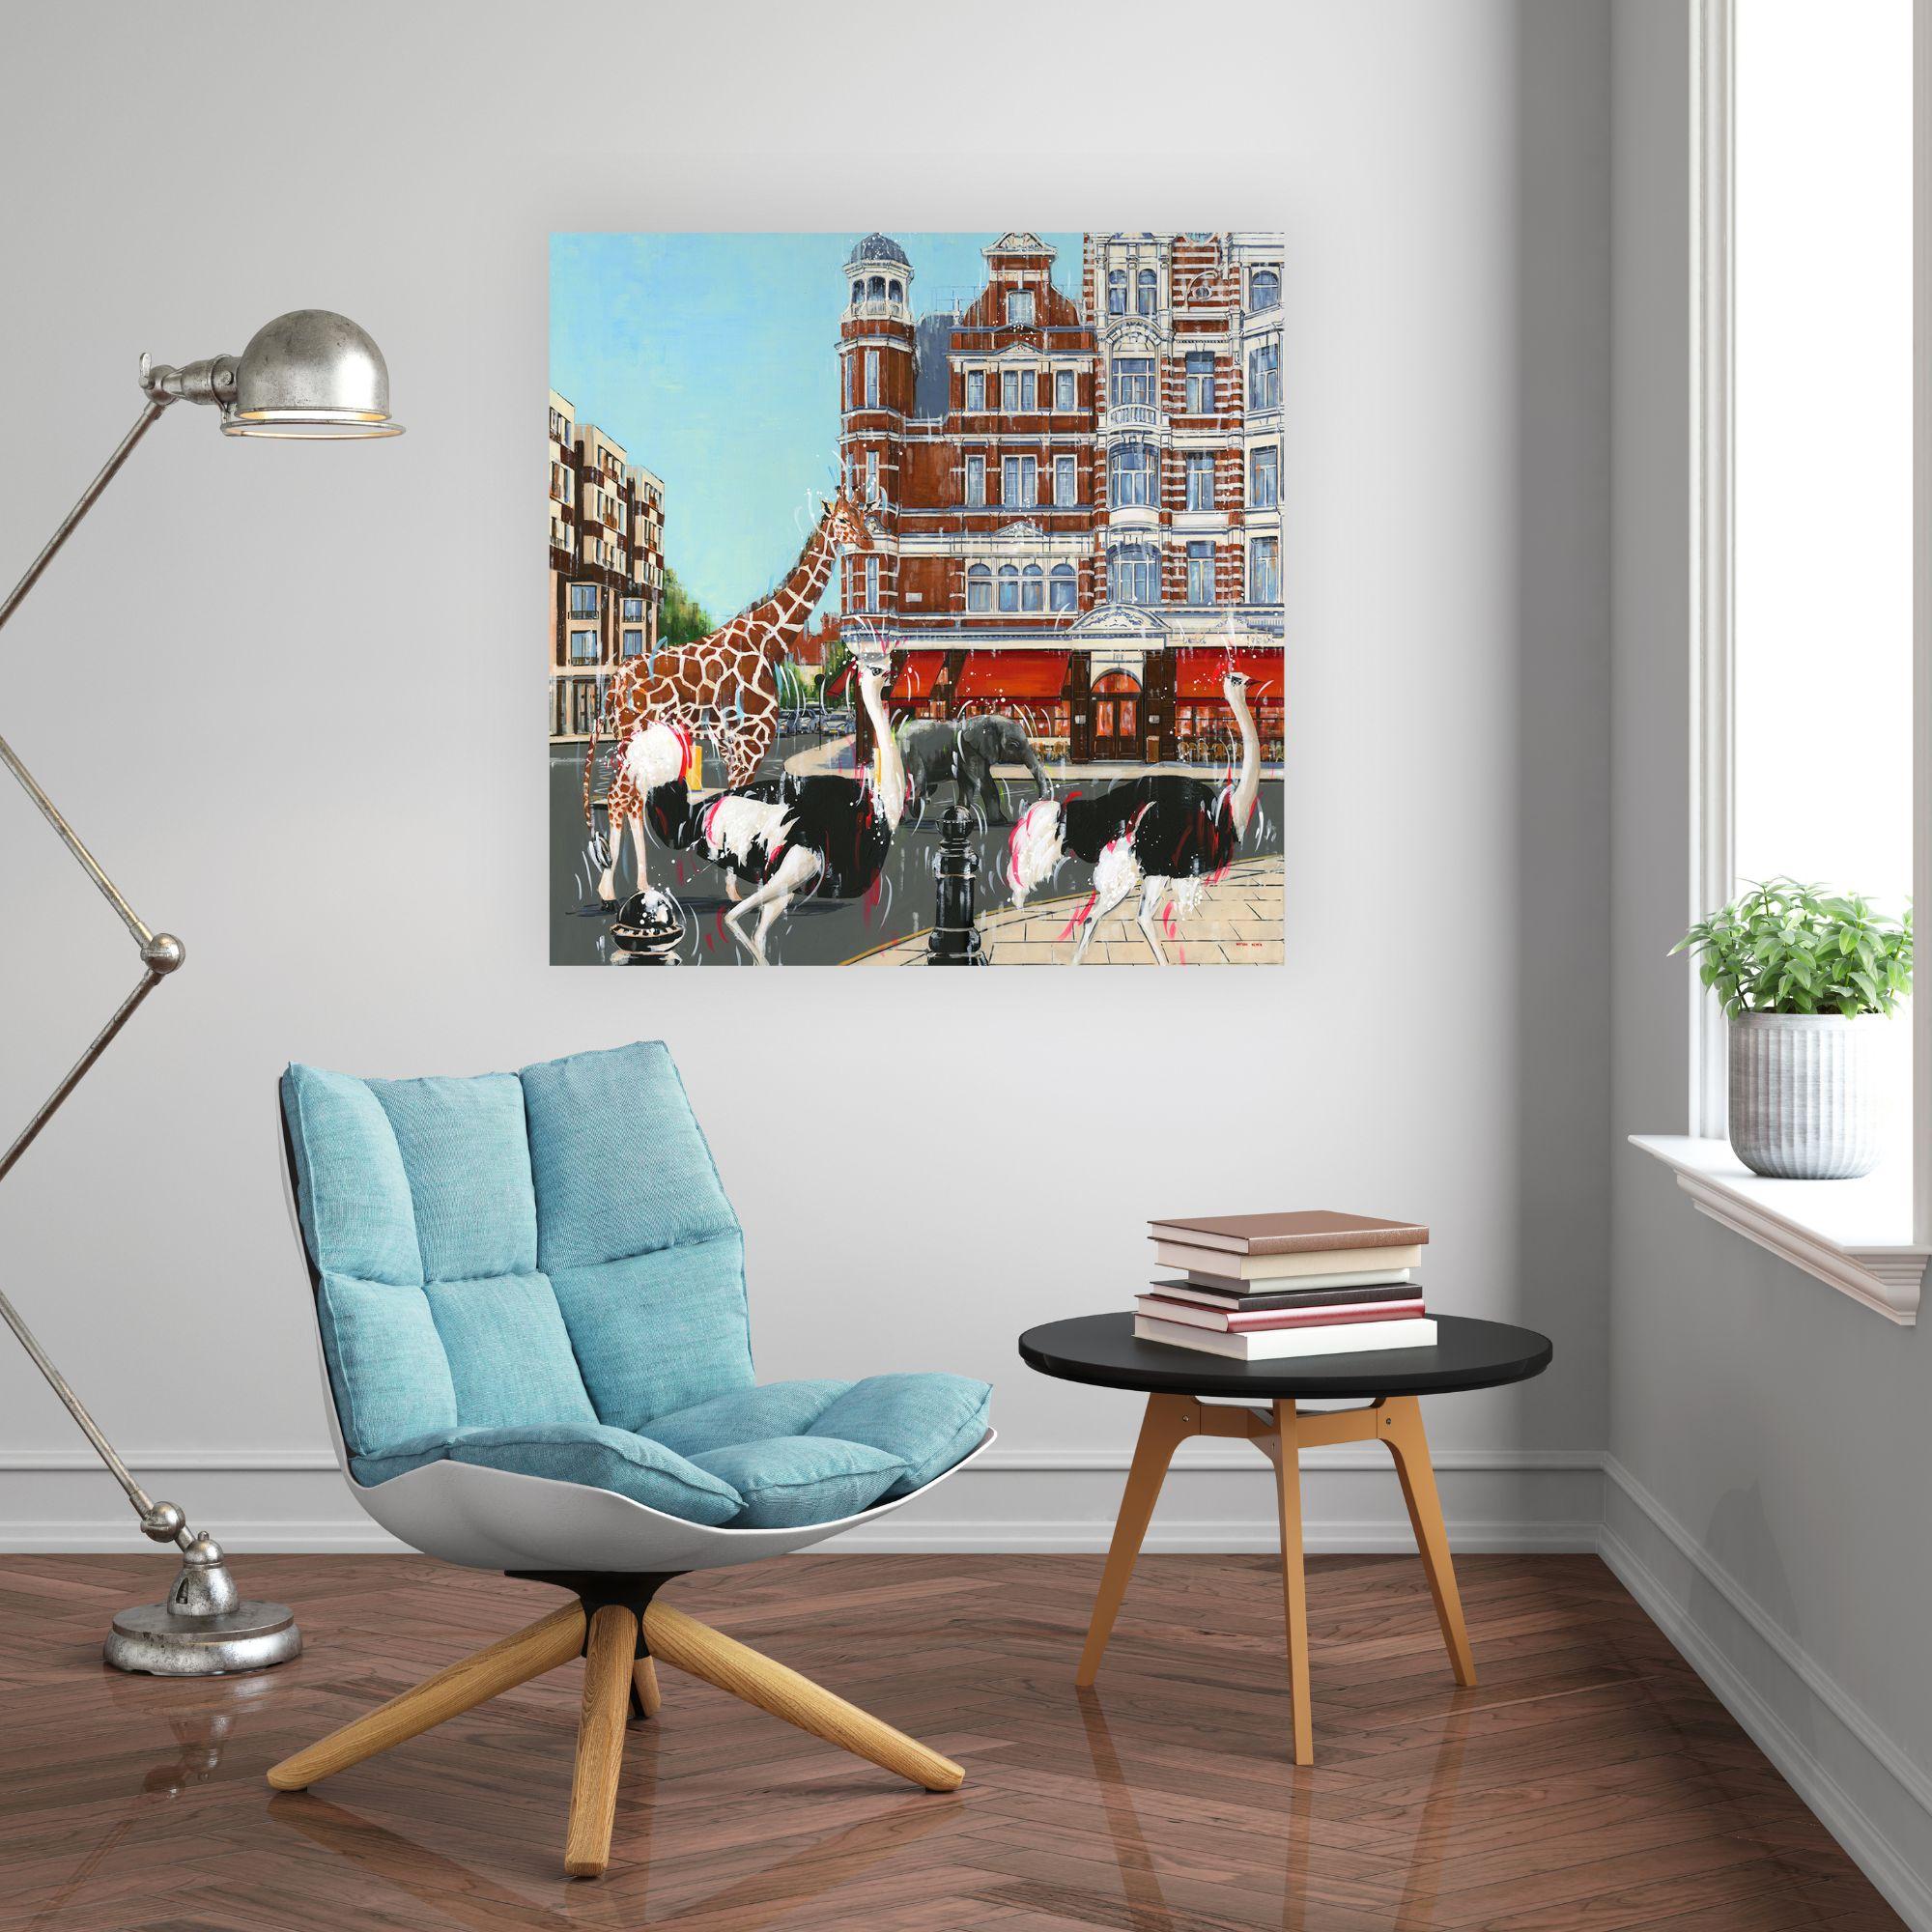 Sloan Square - original London cityscape oil painting -modern art  - Painting by Nathan Neven